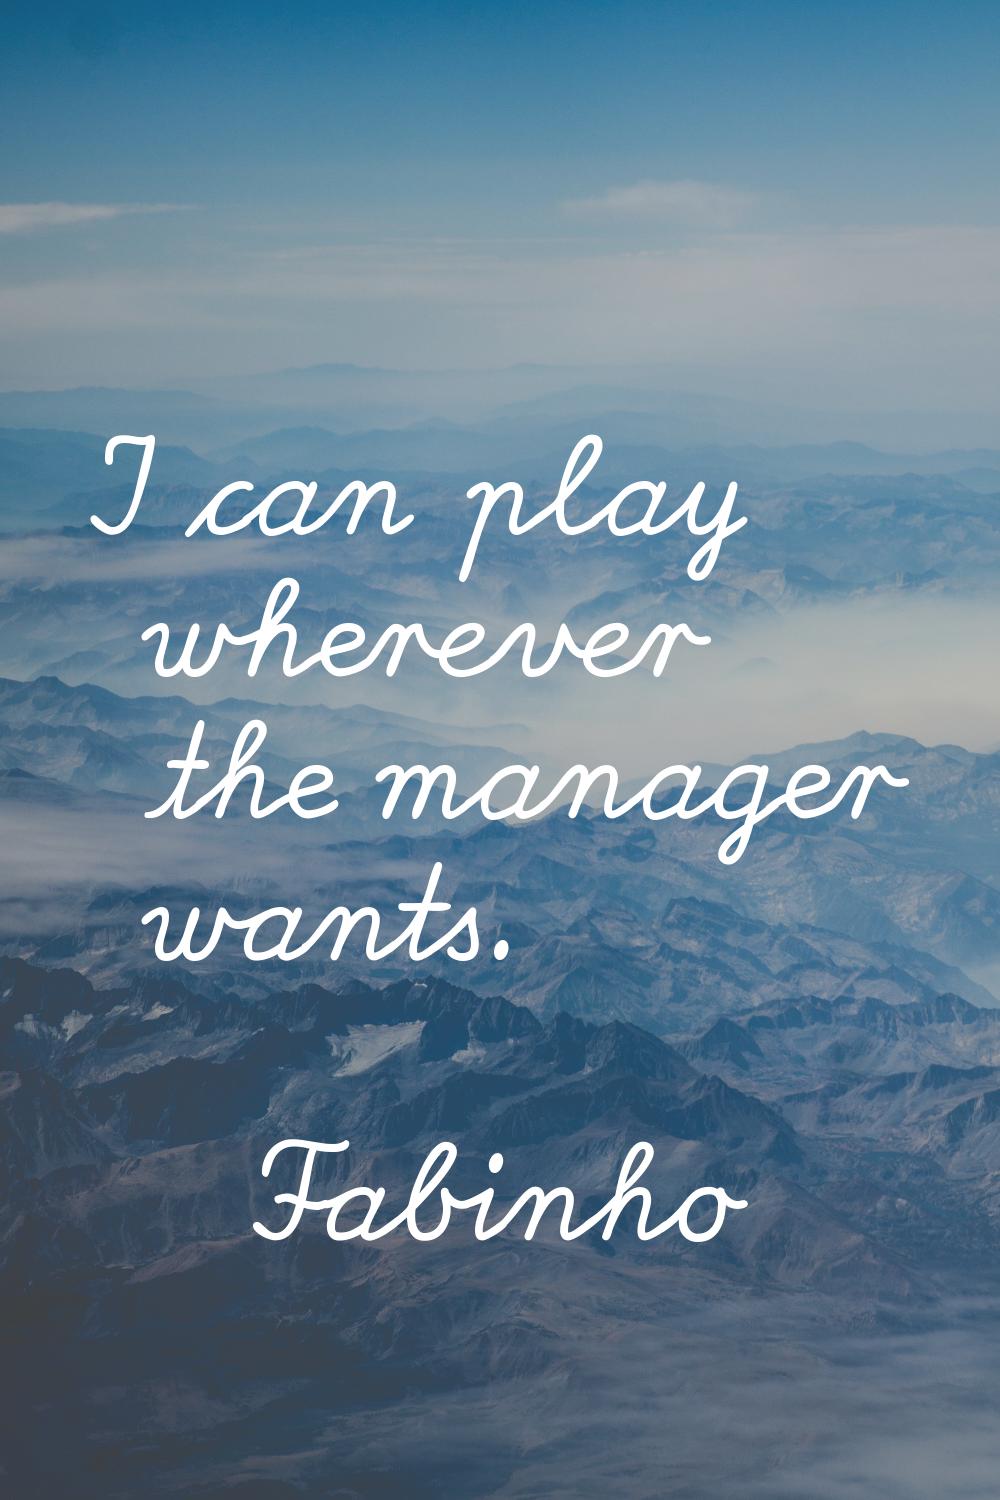 I can play wherever the manager wants.